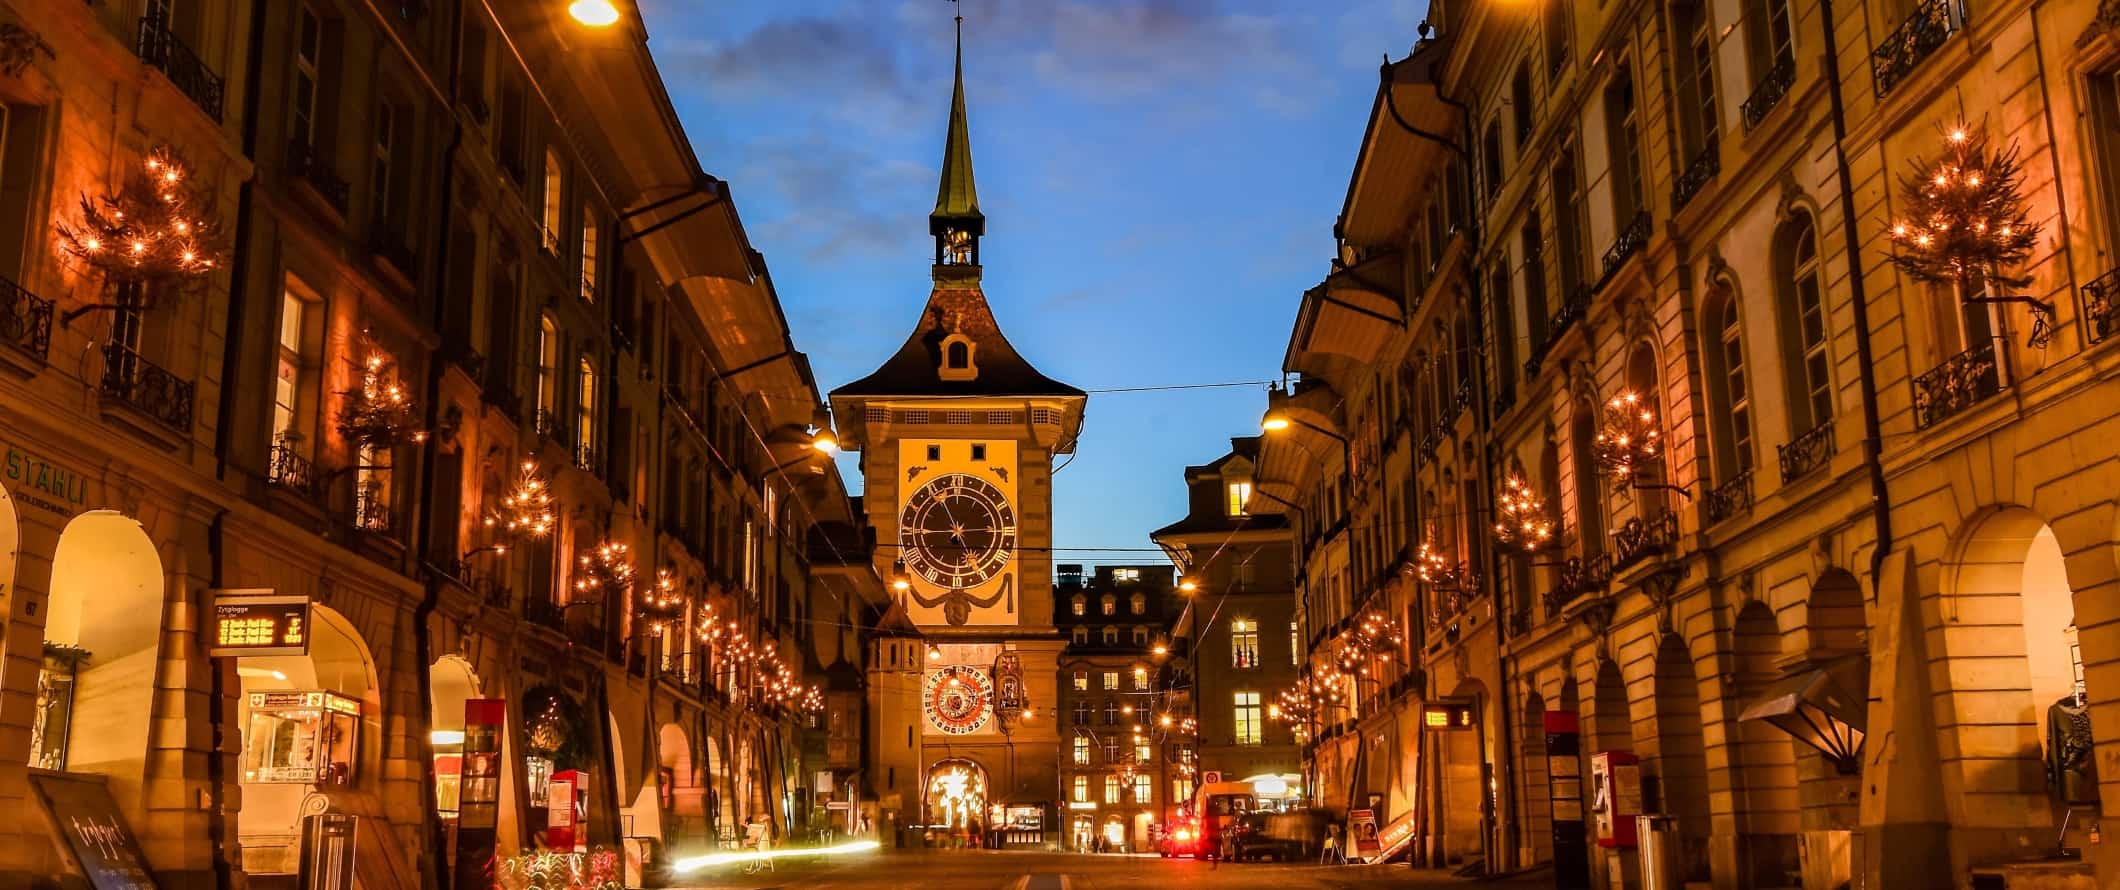 Expansive street with a historic clocktower at the end, lit up at night in Bern, Switzerland